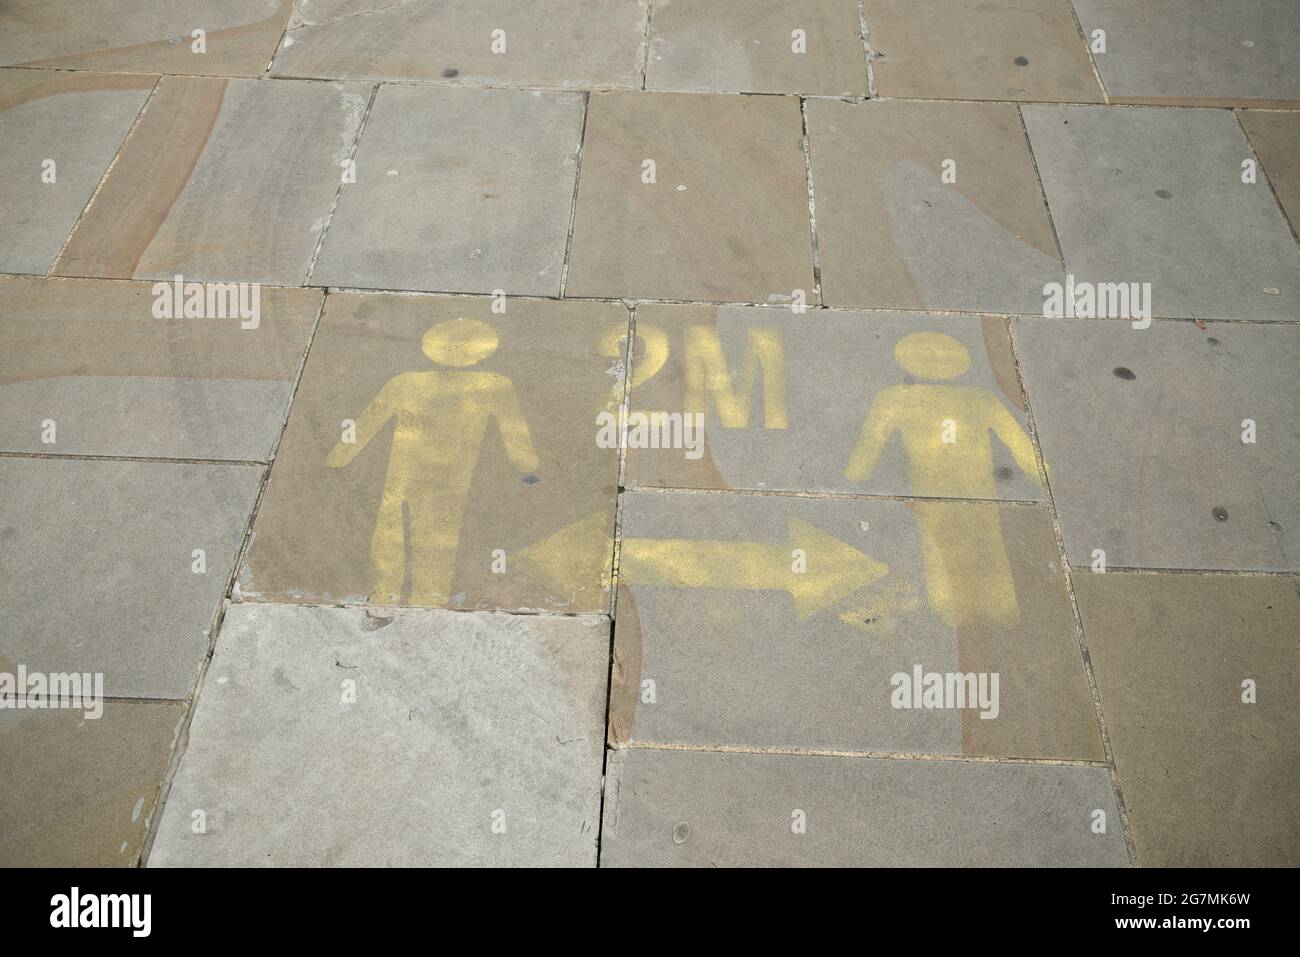 Faded 2 meter social distancing reminders on UK pavements. Stock Photo